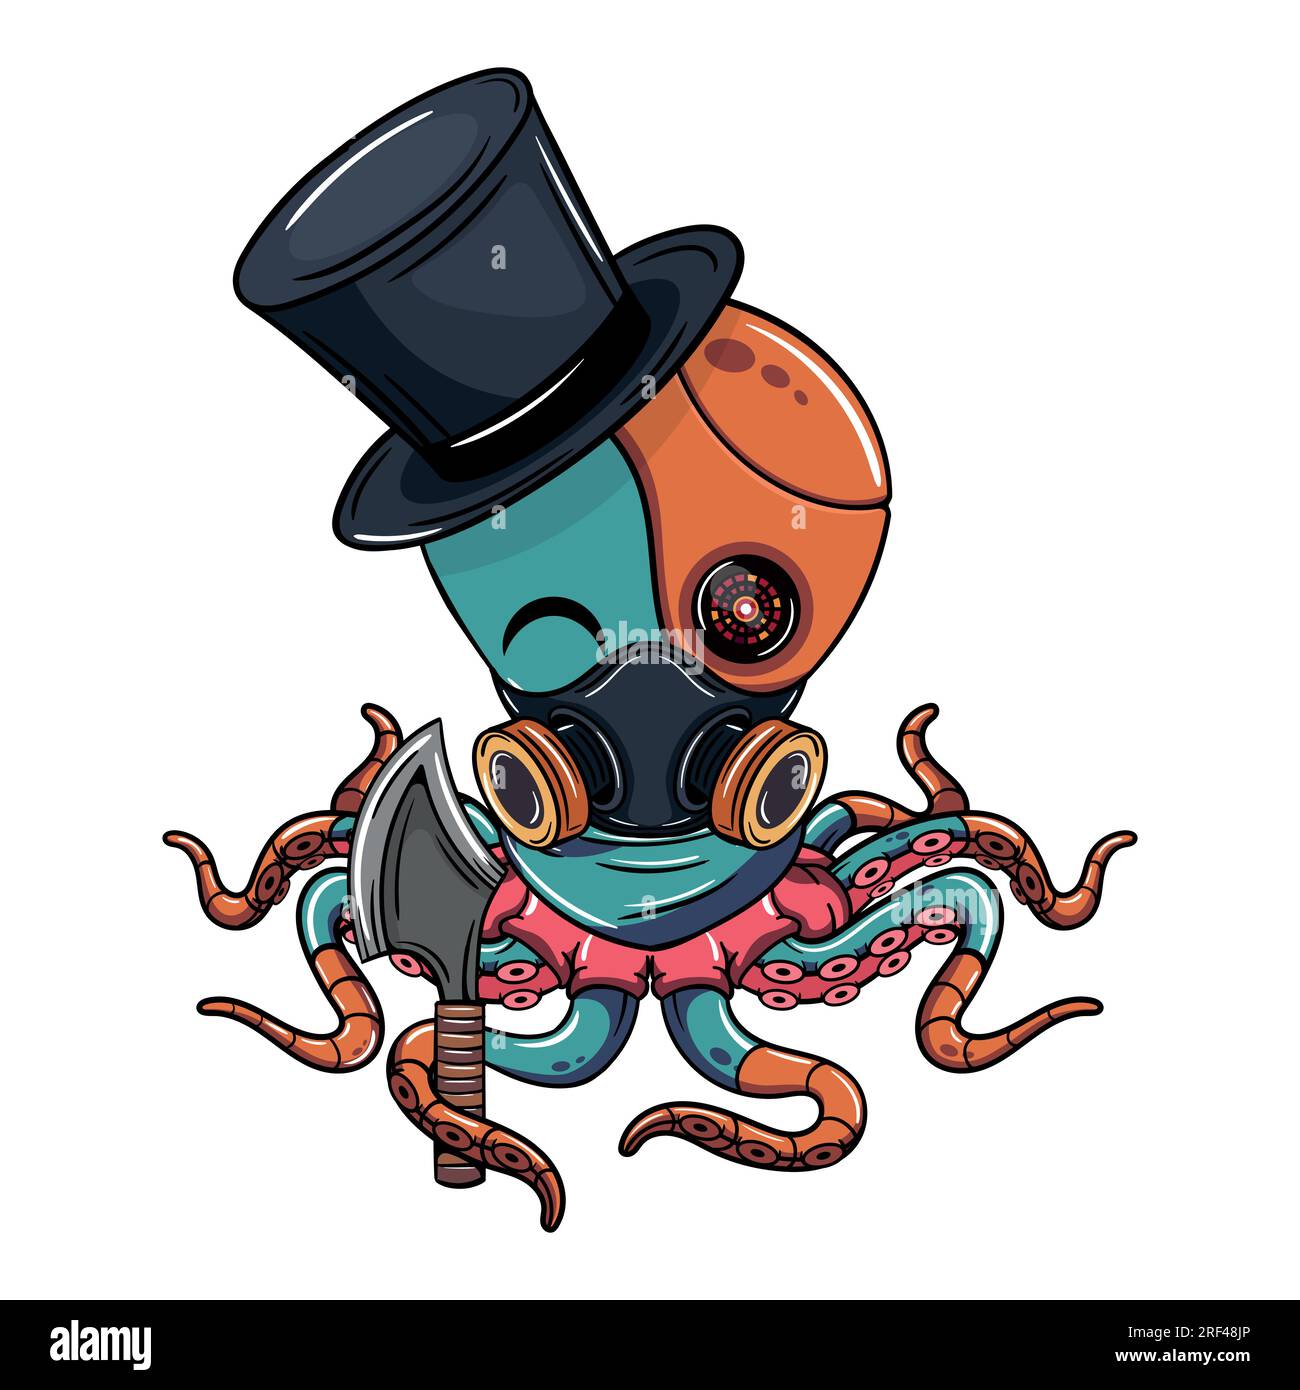 Cartoon cyborg octopus character with top hat and an axe. Illustration for fantasy, science fiction and adventure comics Stock Vector